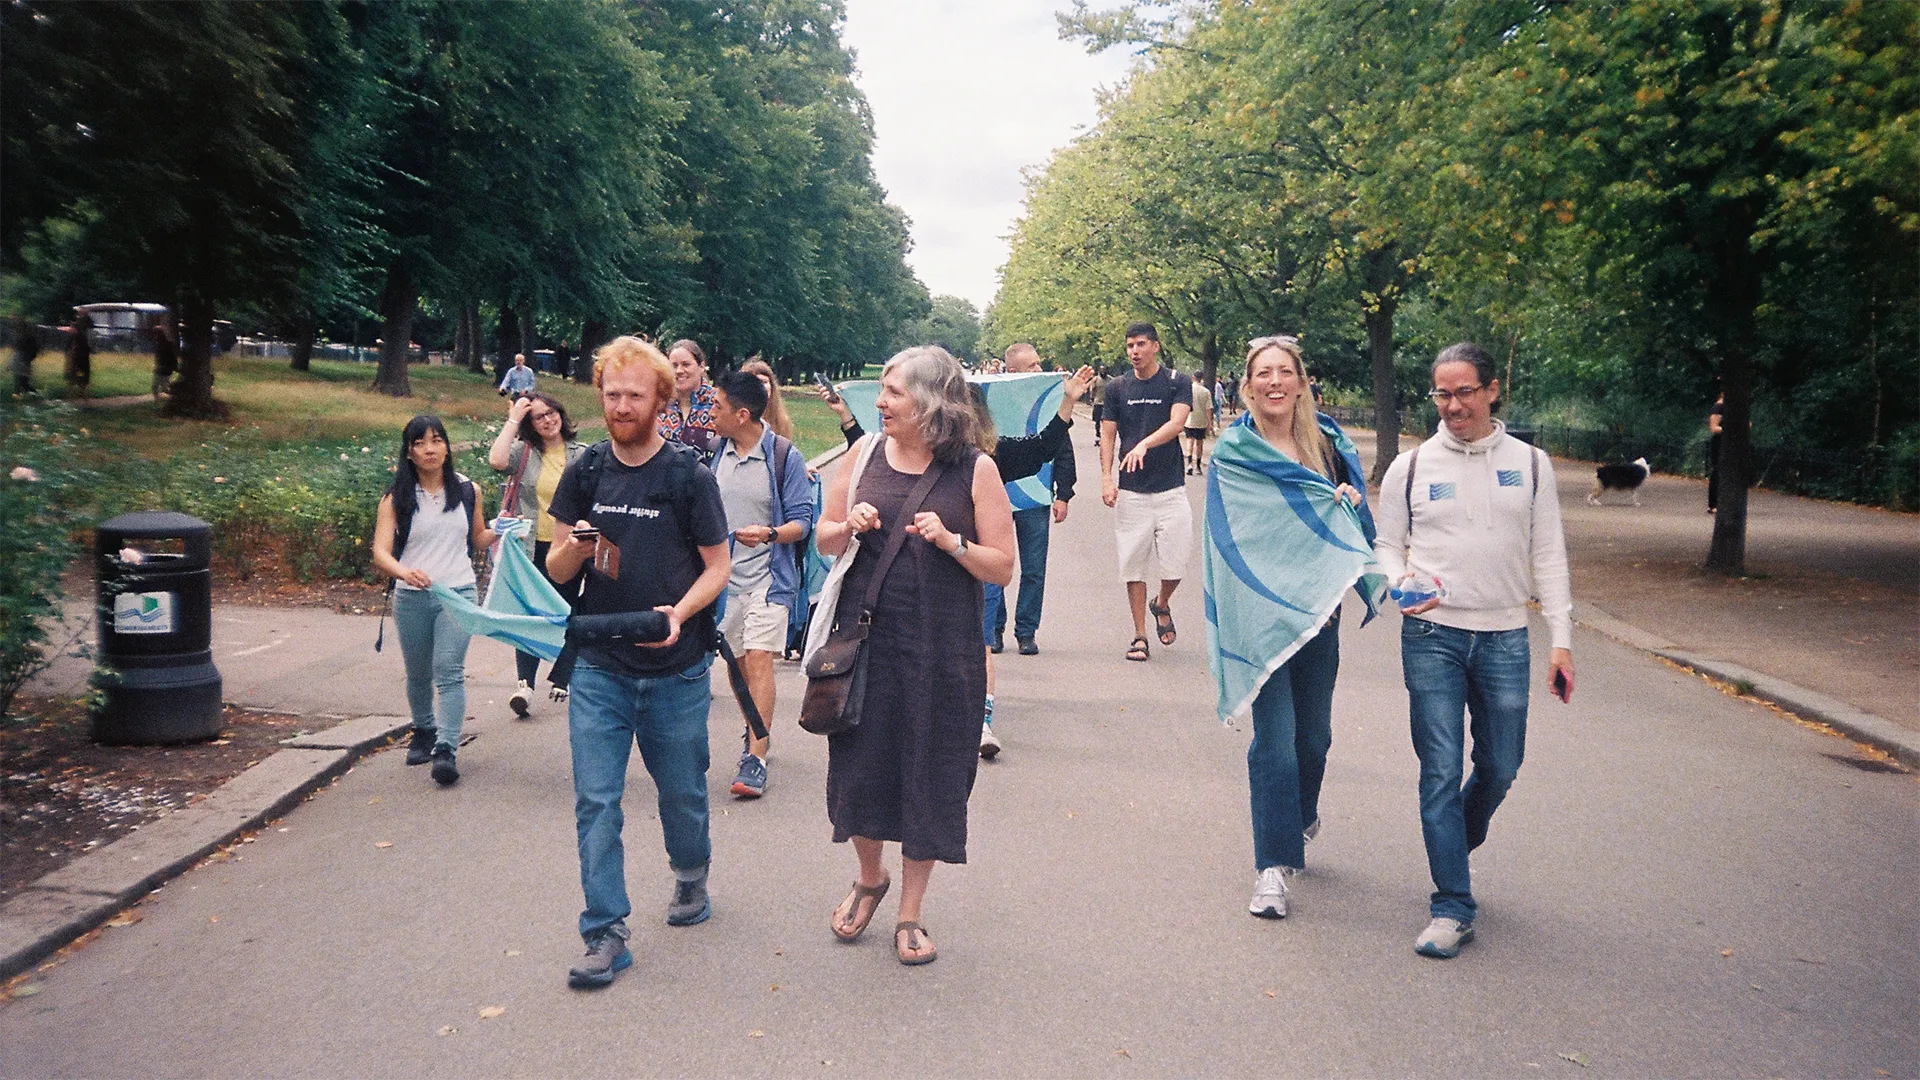 A group of people march down a wide park pathway, waving flags. The flags are seagreen and ultramarine blue waves.